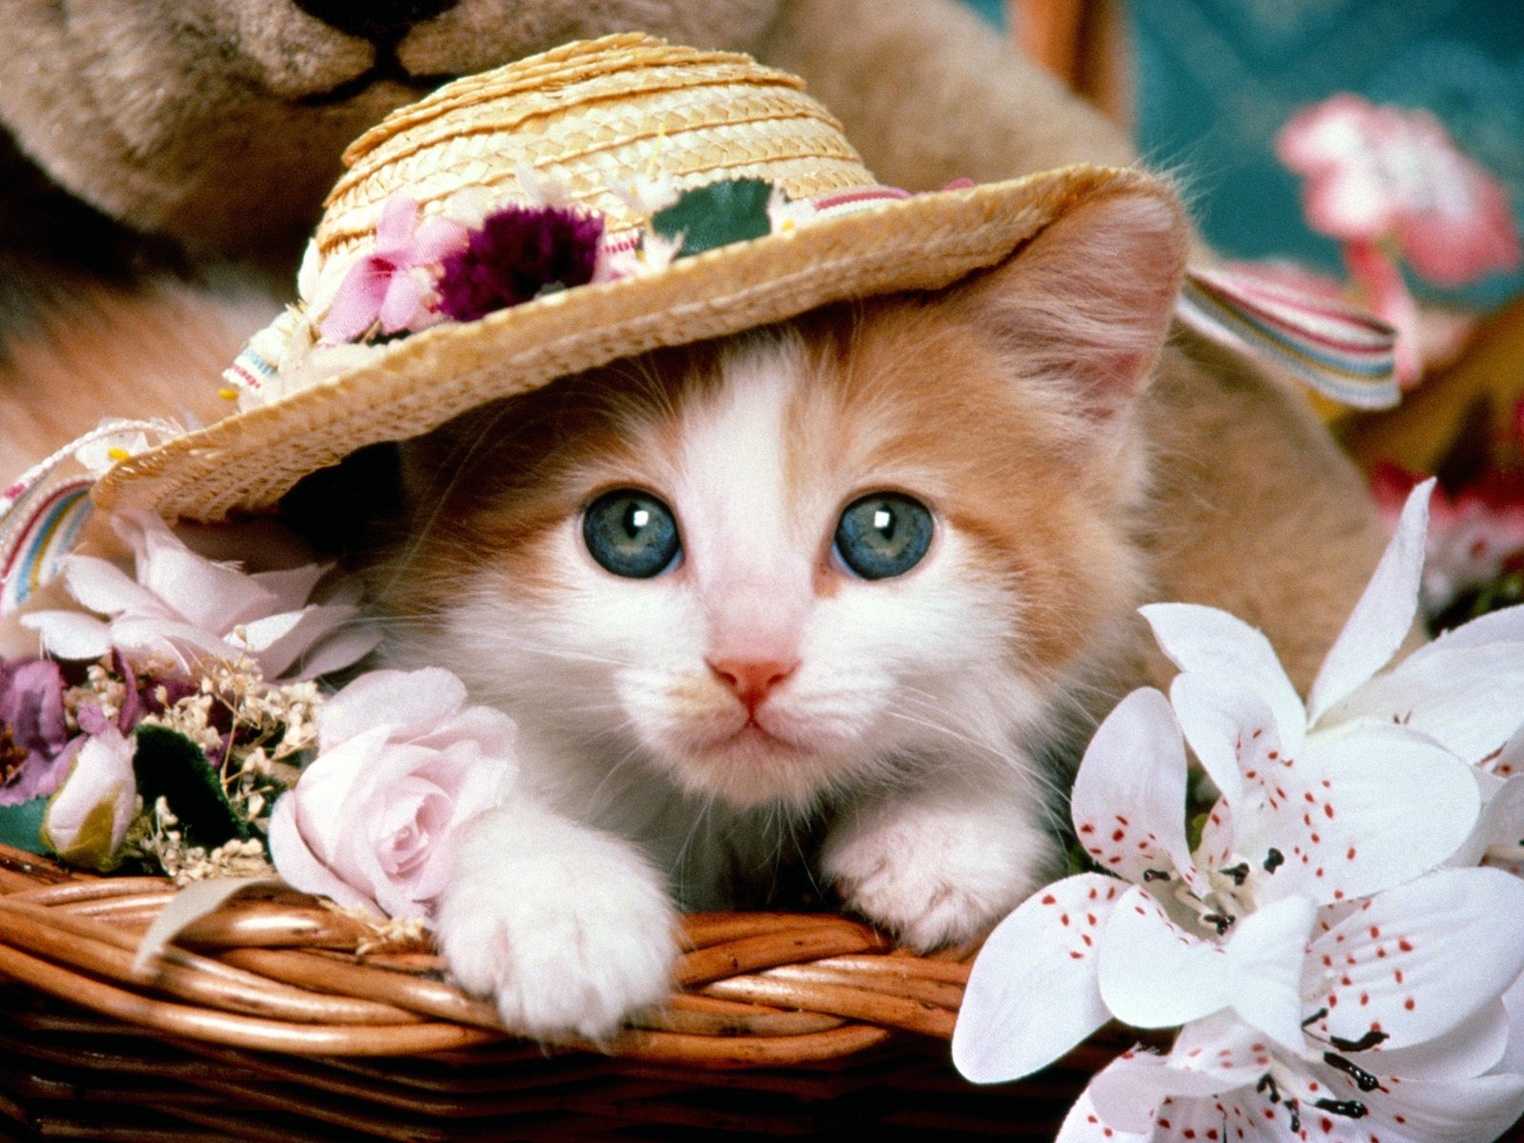 Cute Baby Cats Wallpaper Desktop High Quality Of iPhone White